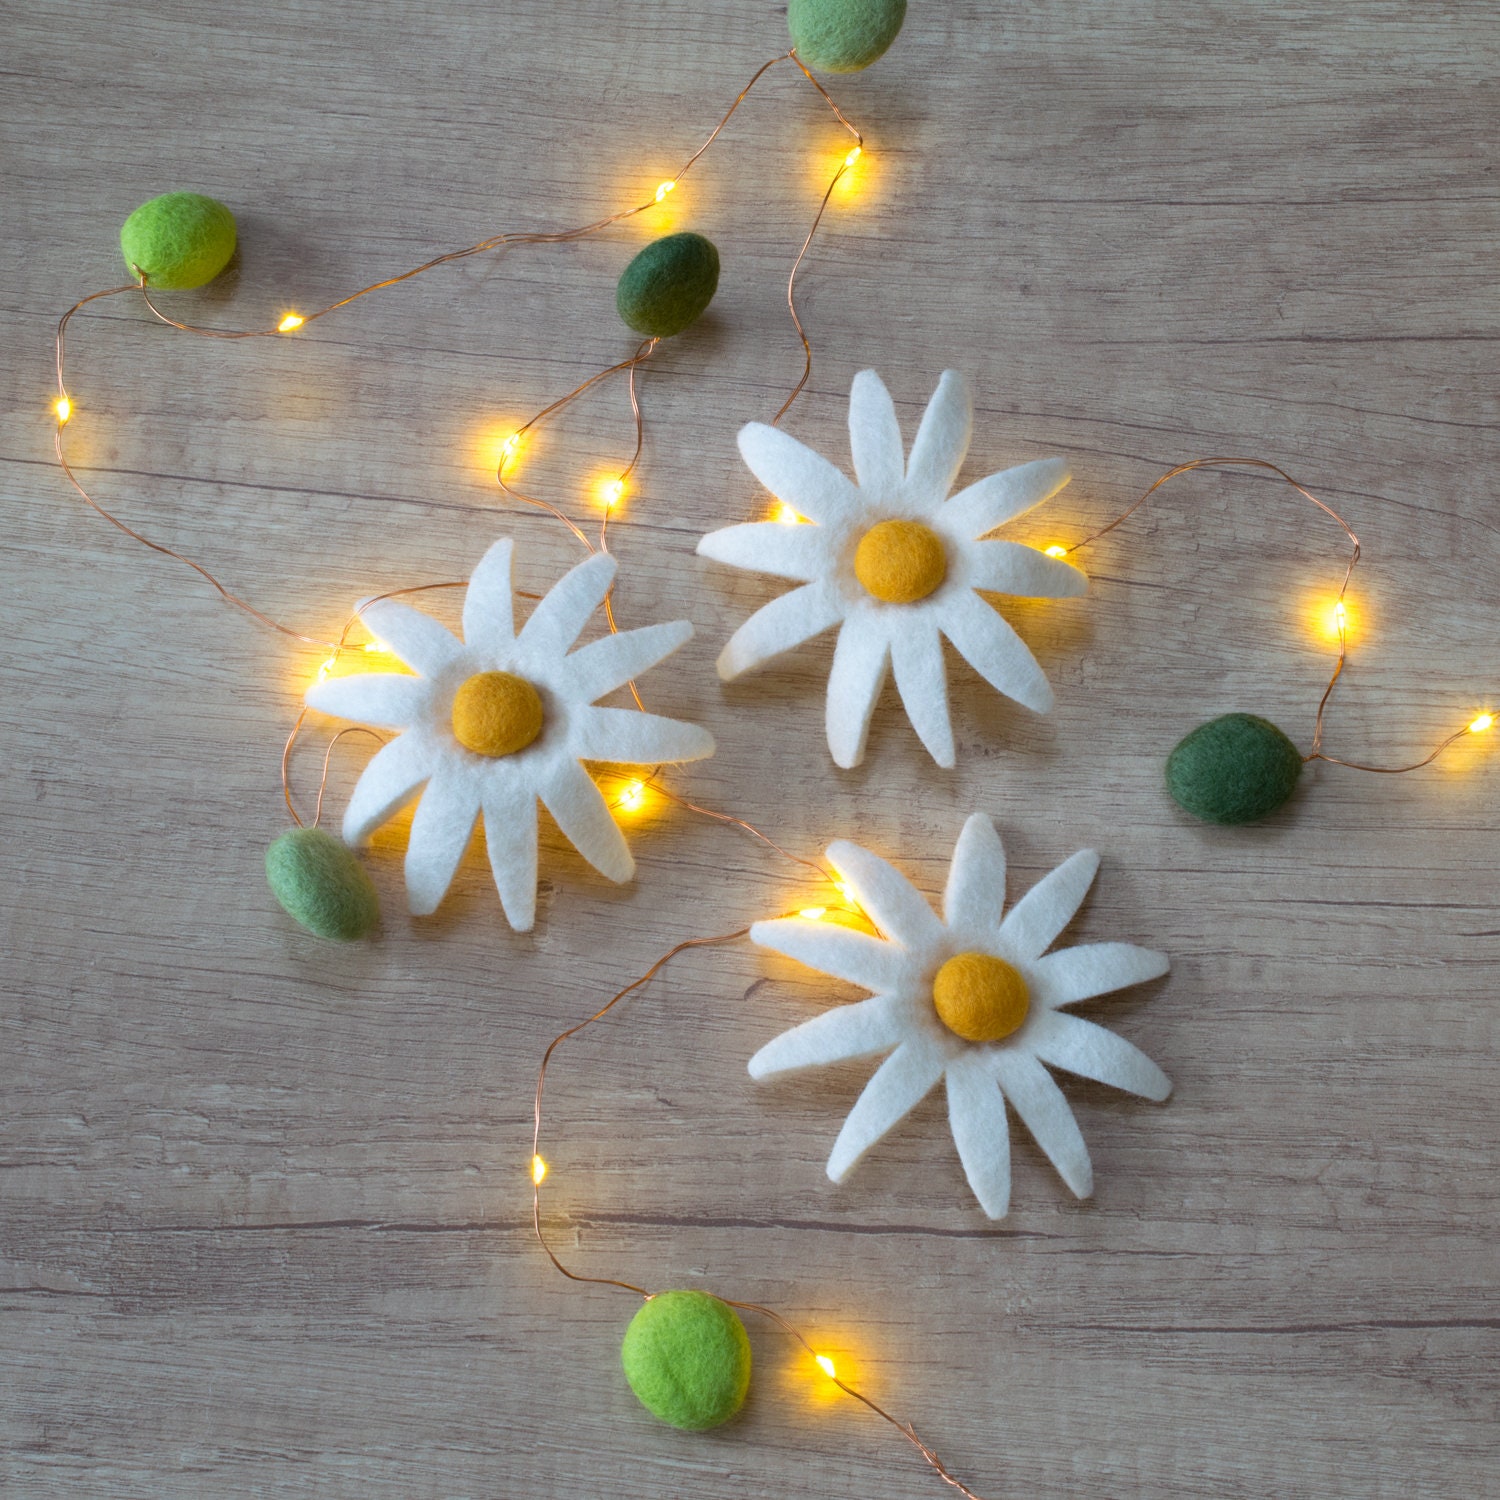 Felt Daisy Garlands for Decorations Spring Party Decor